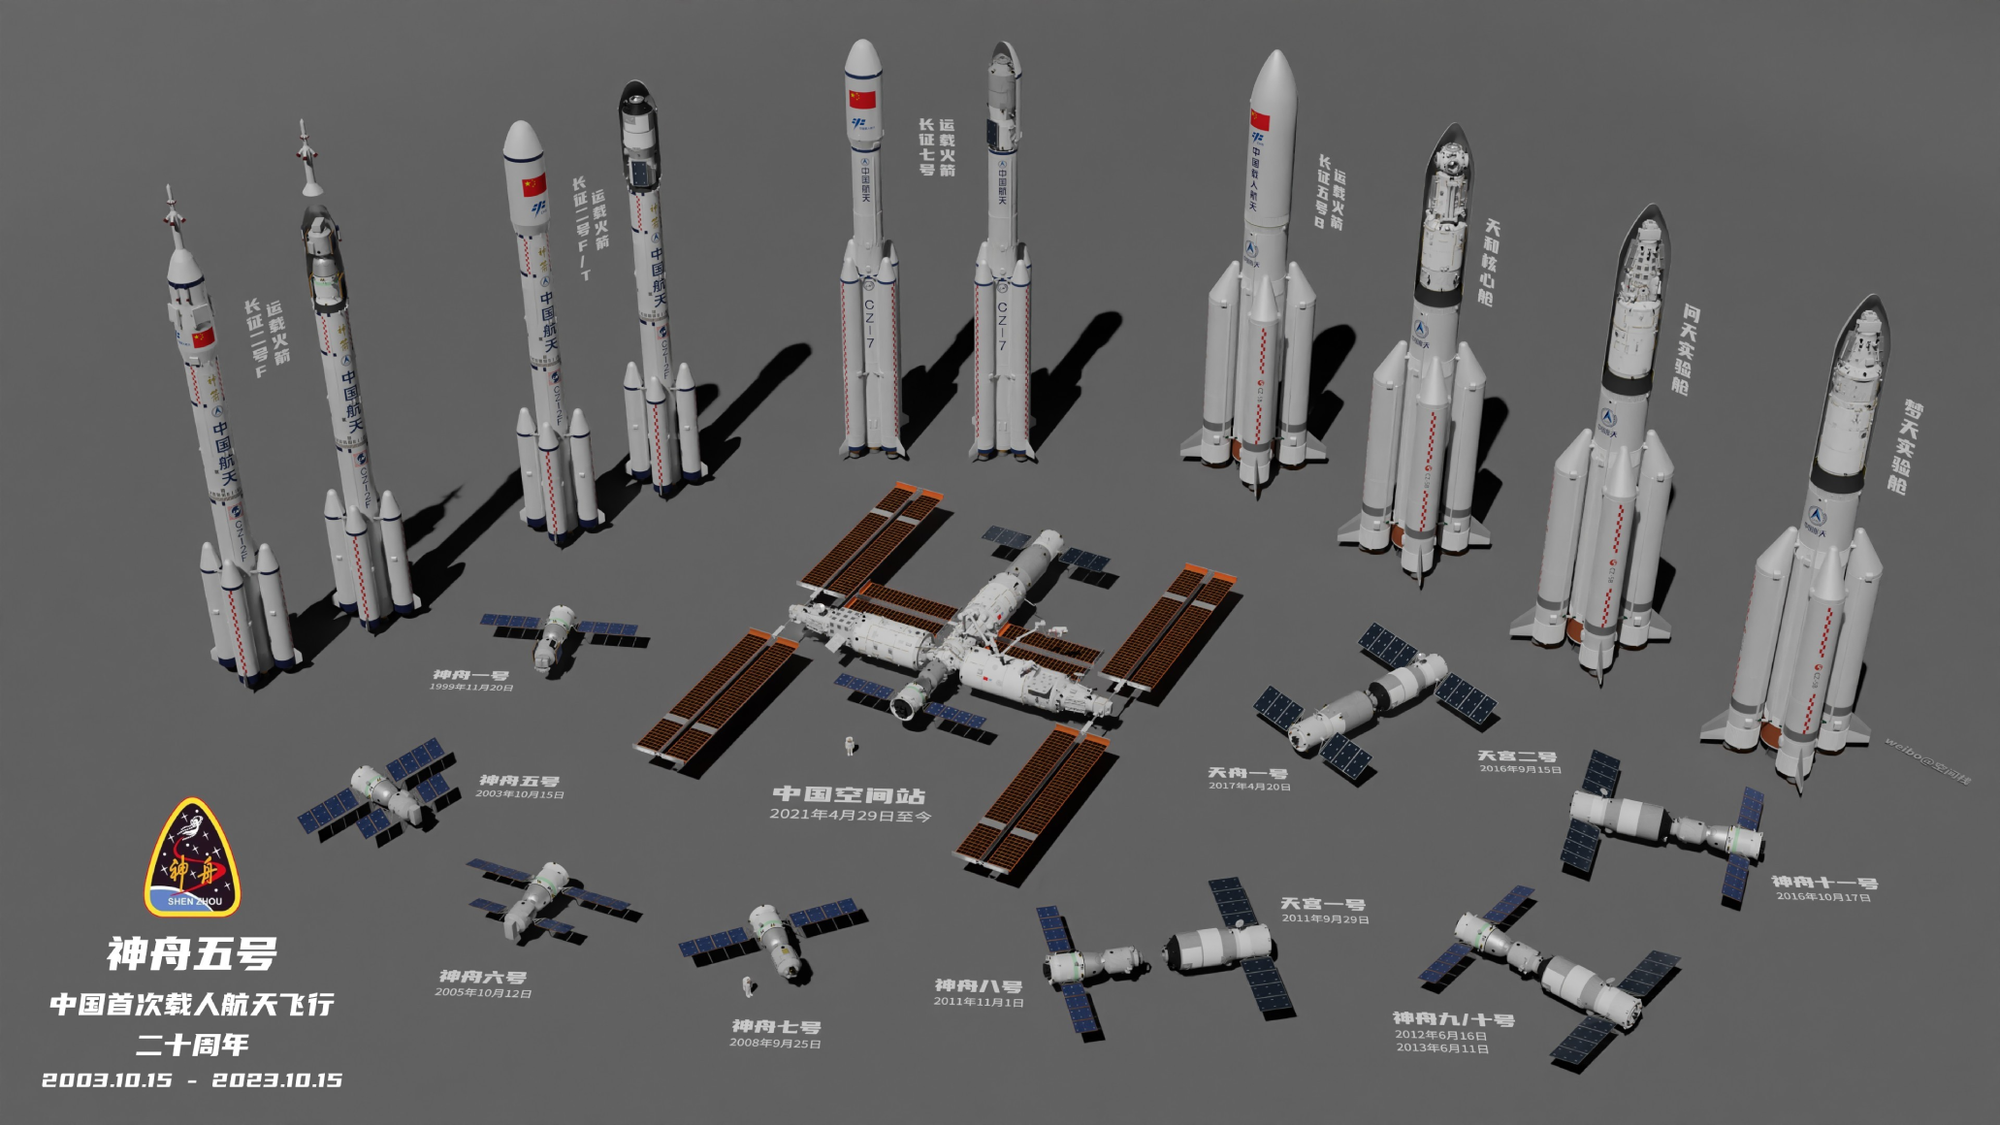 A render of every major Chinese spaceflight milestone by 空间栈 on Weibo.